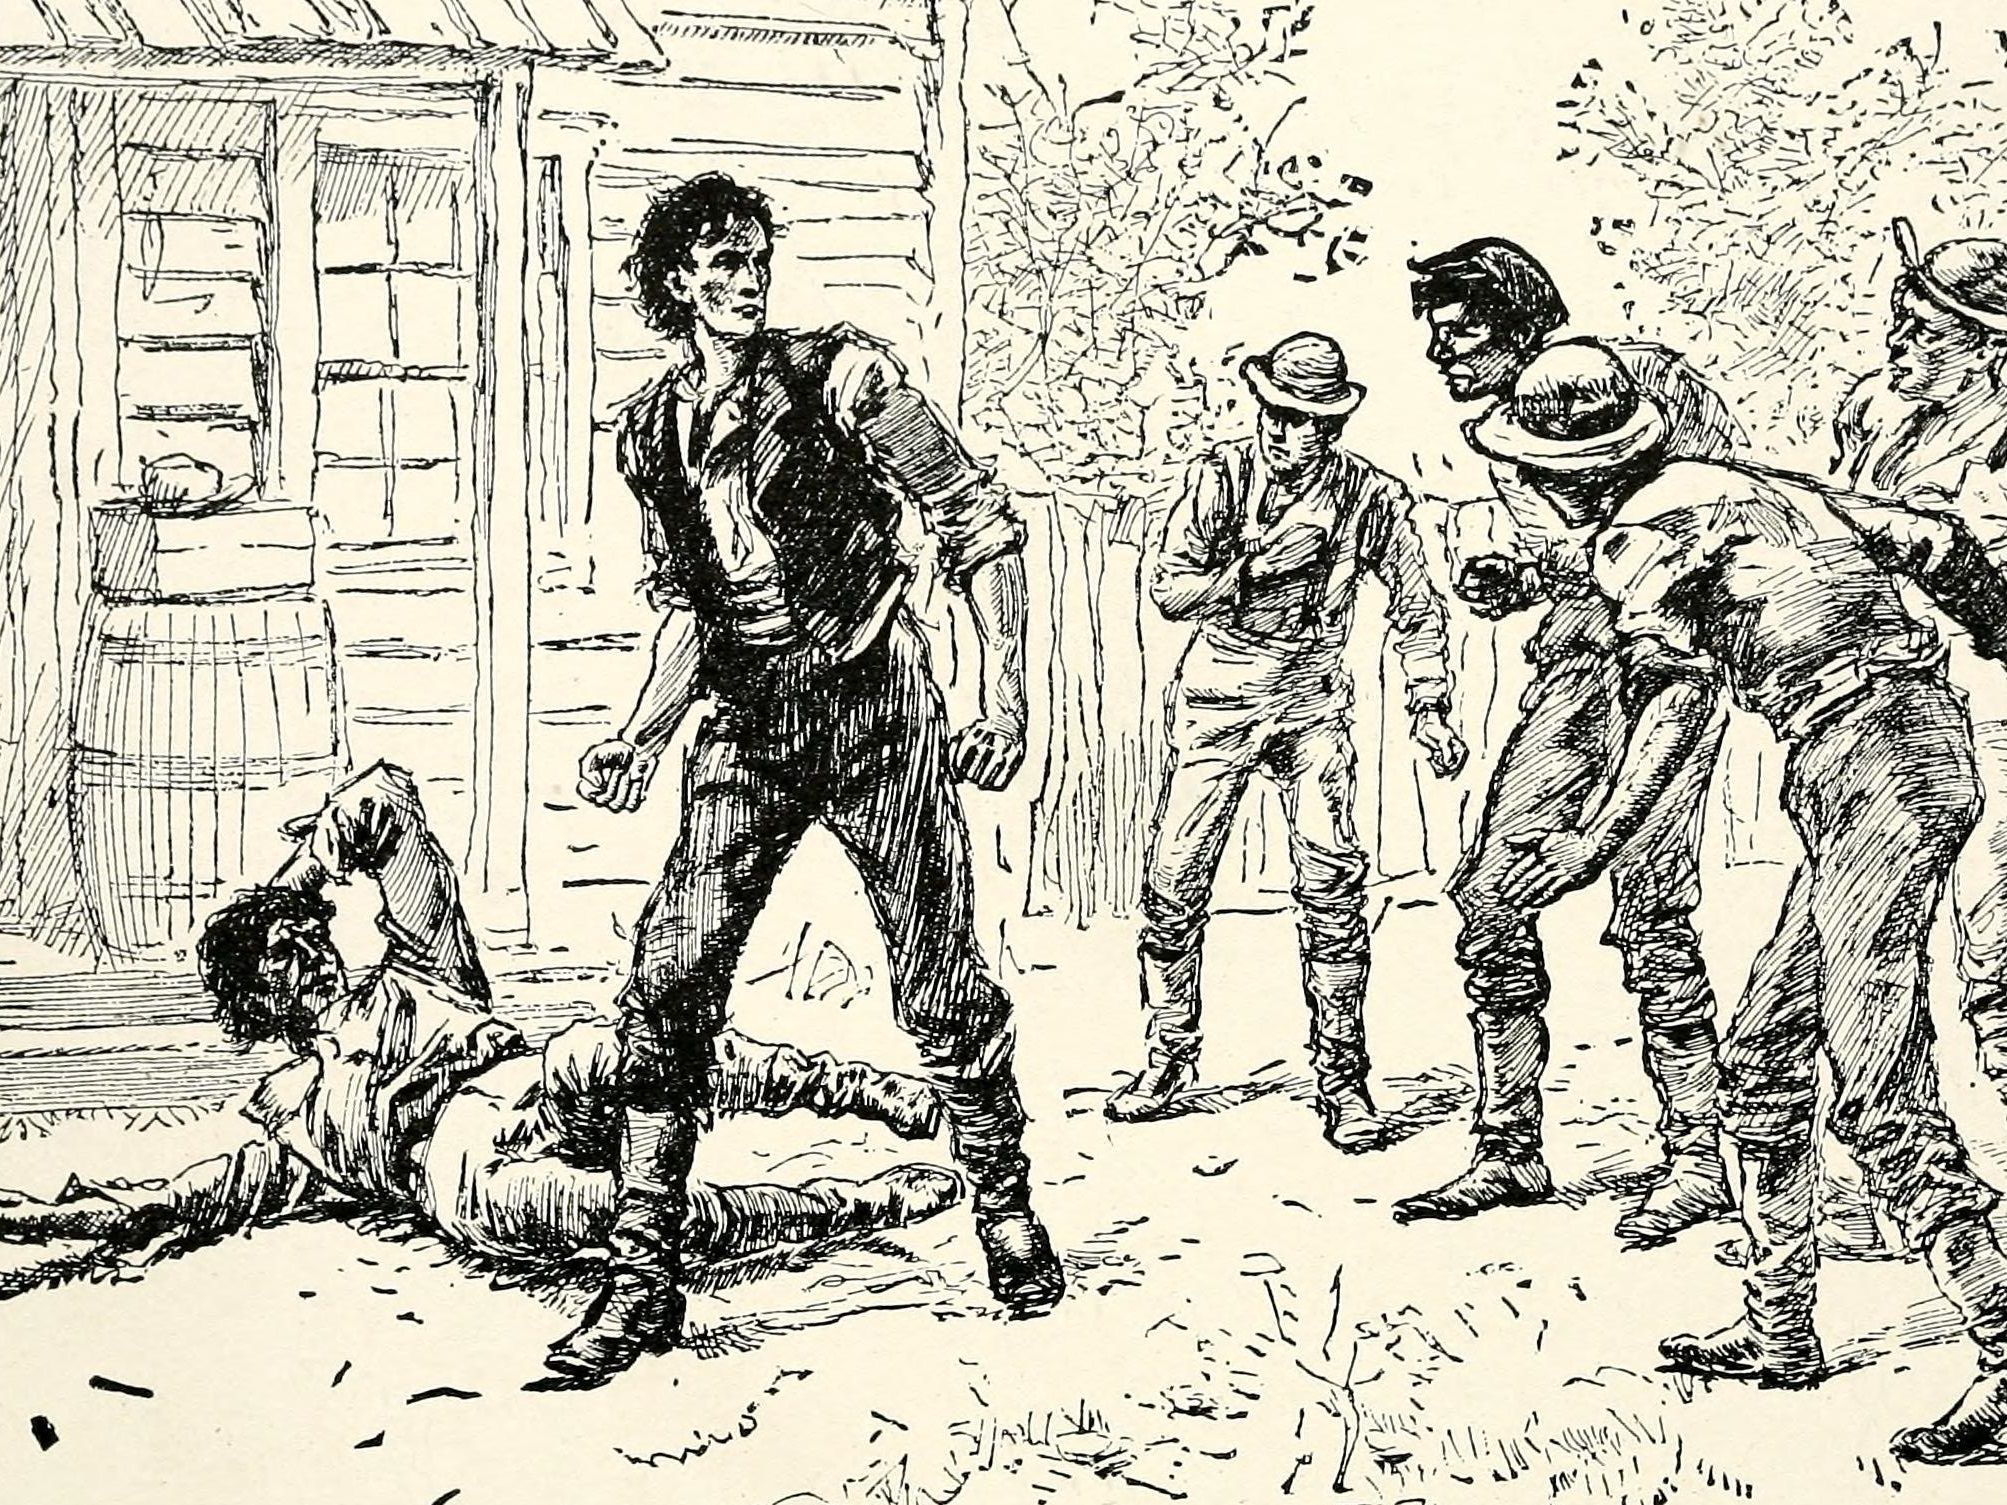 Drawing of Abraham Lincoln winning a wrestling bout